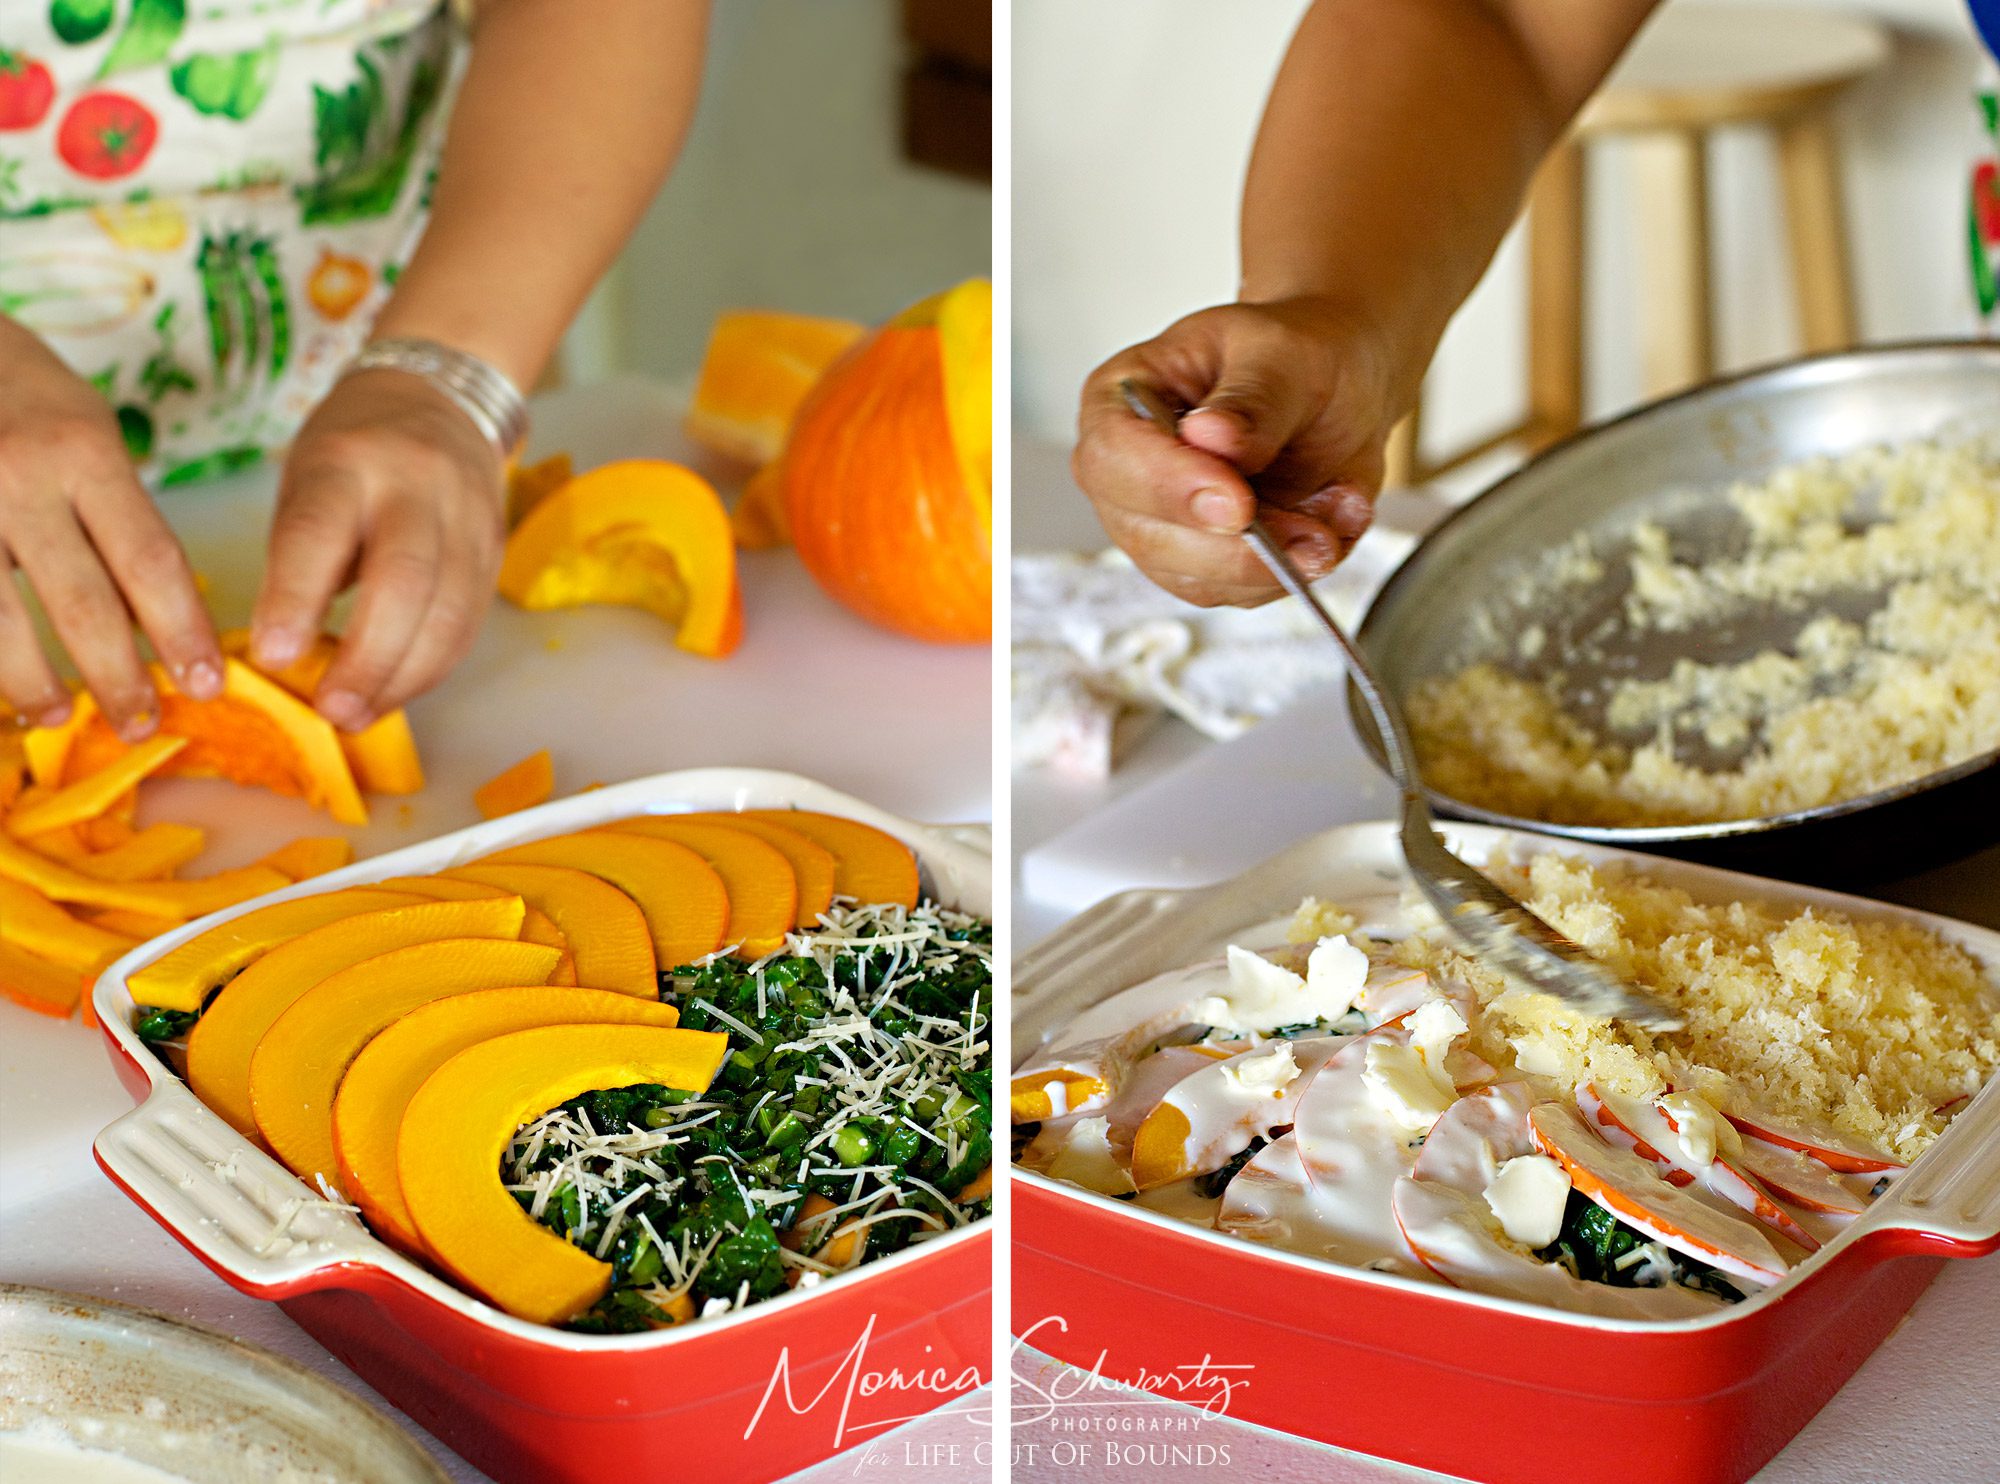 Chef-Lee-Anne-Wong-prepping-Butternut-Squash-and-Curried-Kale-Gratin-with-Local-Goat-Cheese